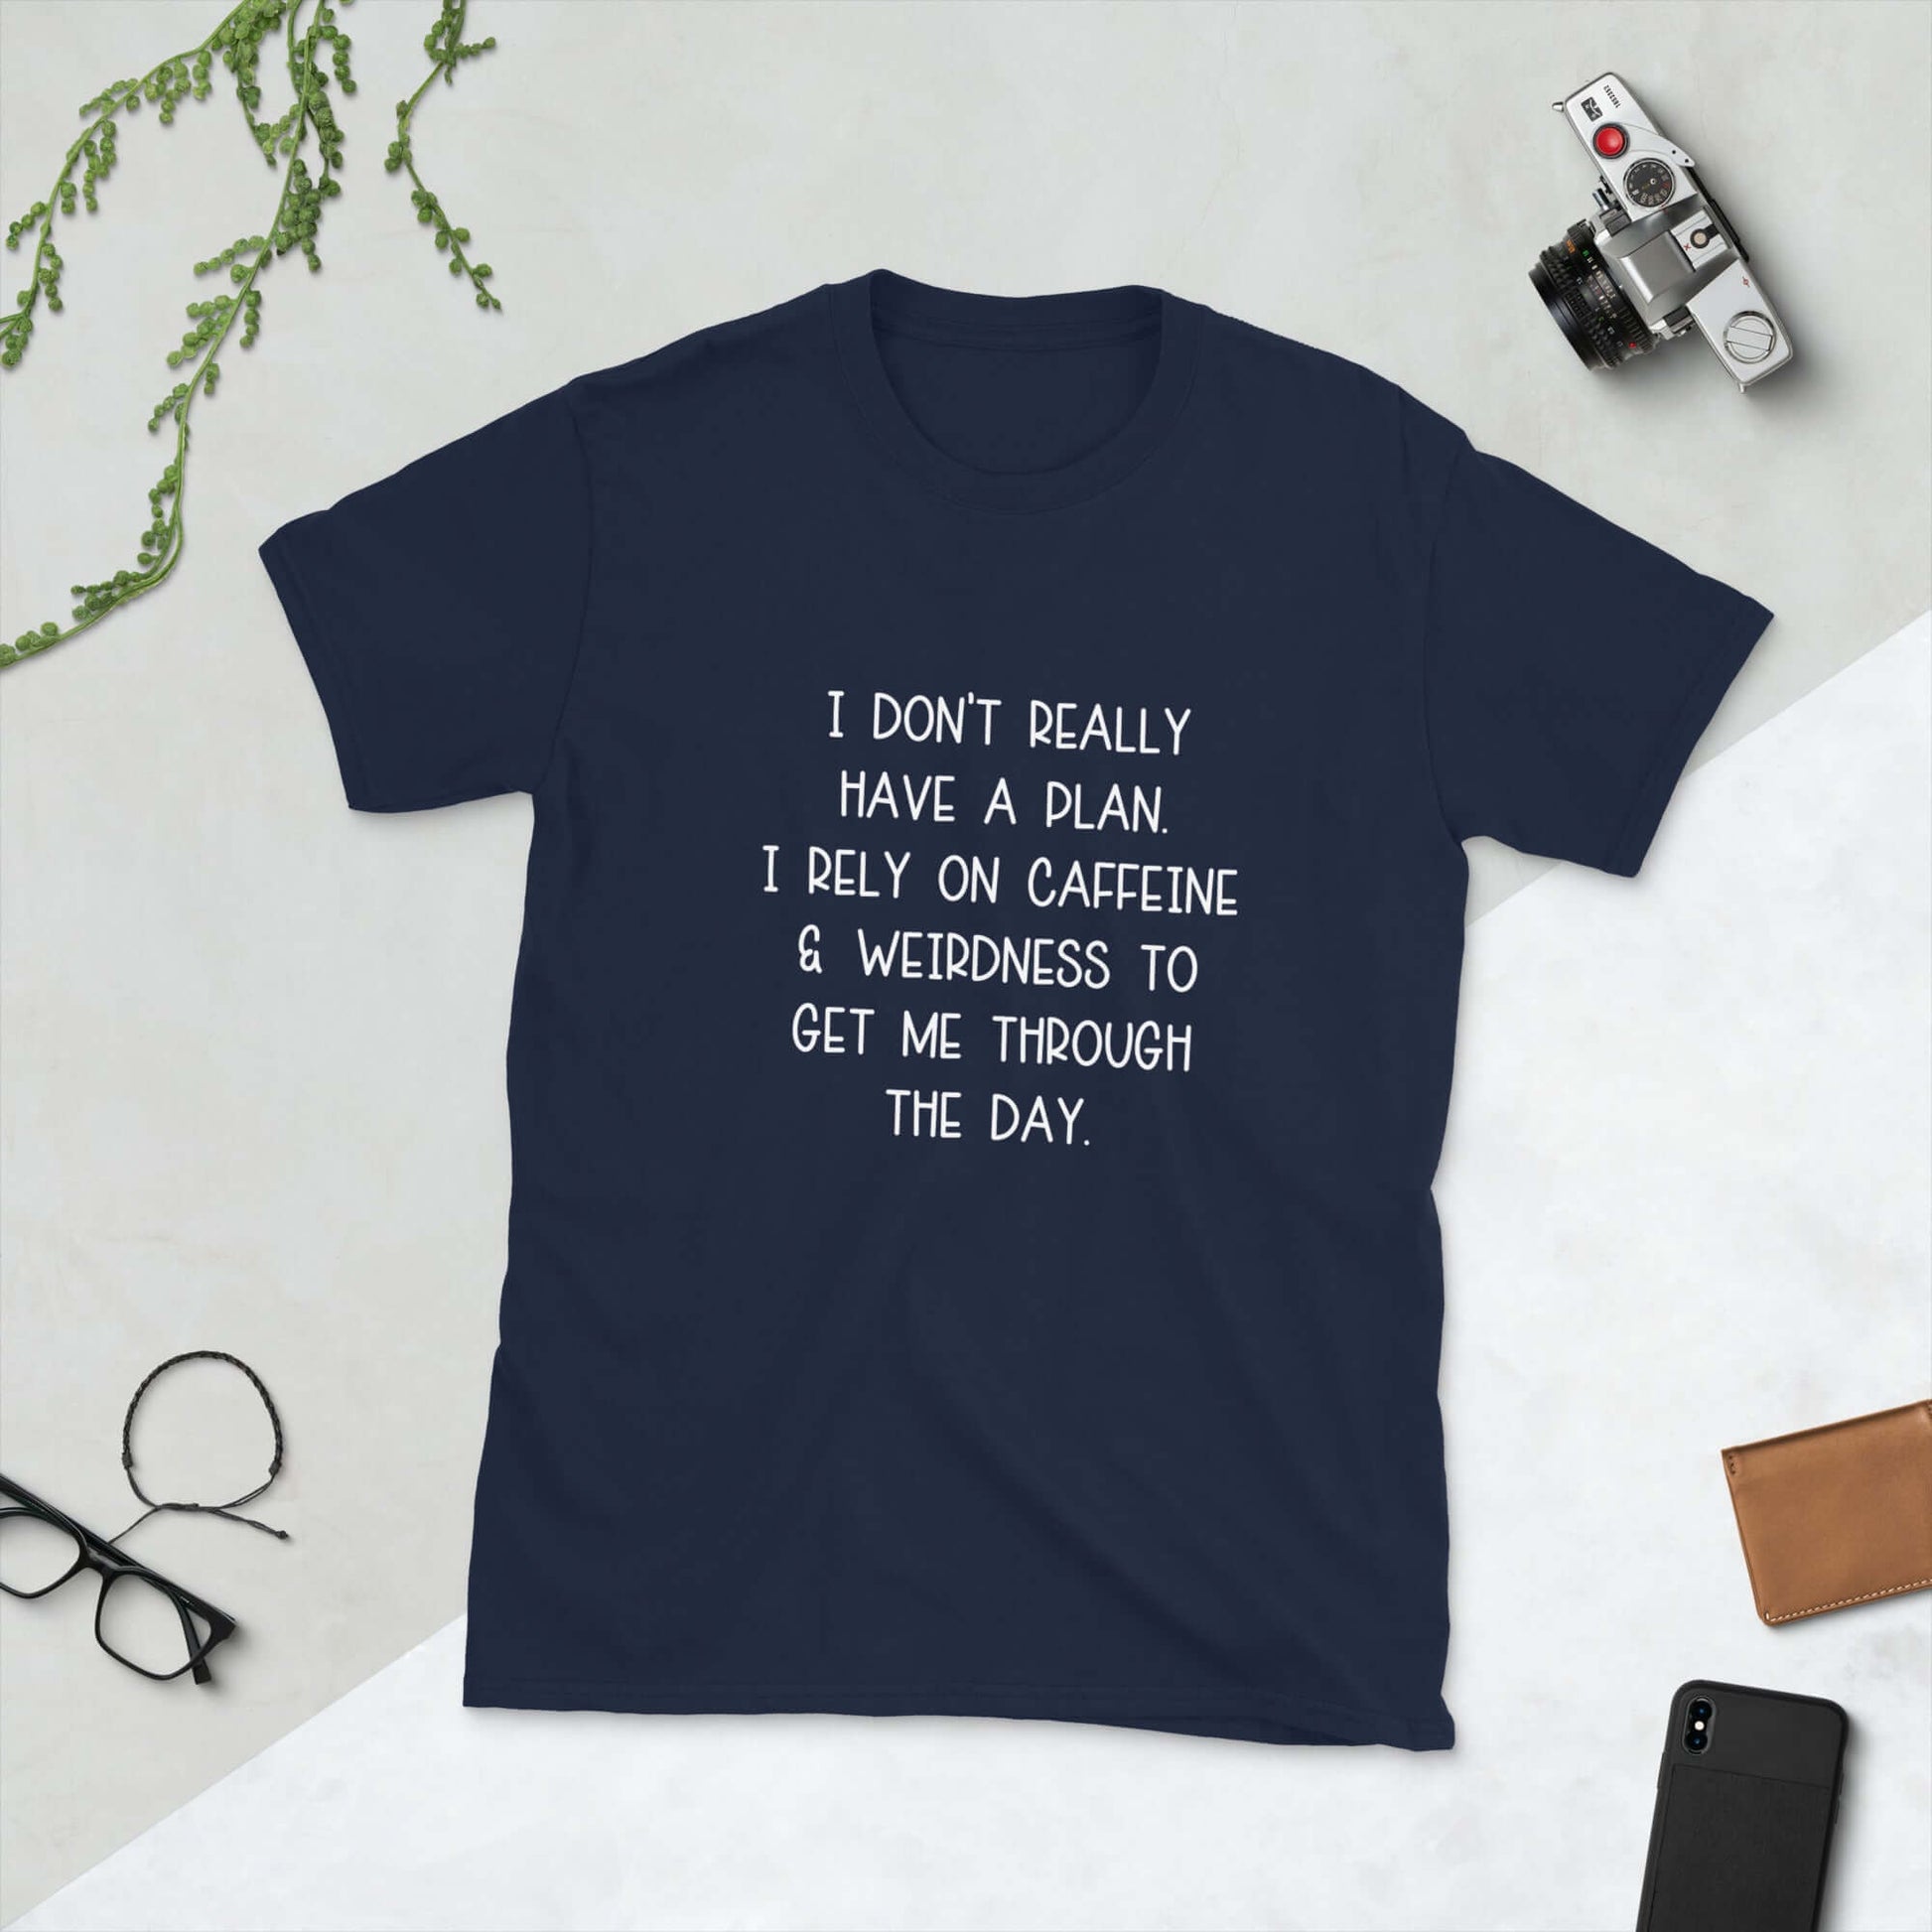 Navy blue t-shirt with the words I don't really have a plan. I rely on caffeine & weirdness to get me through the day printed on the front.